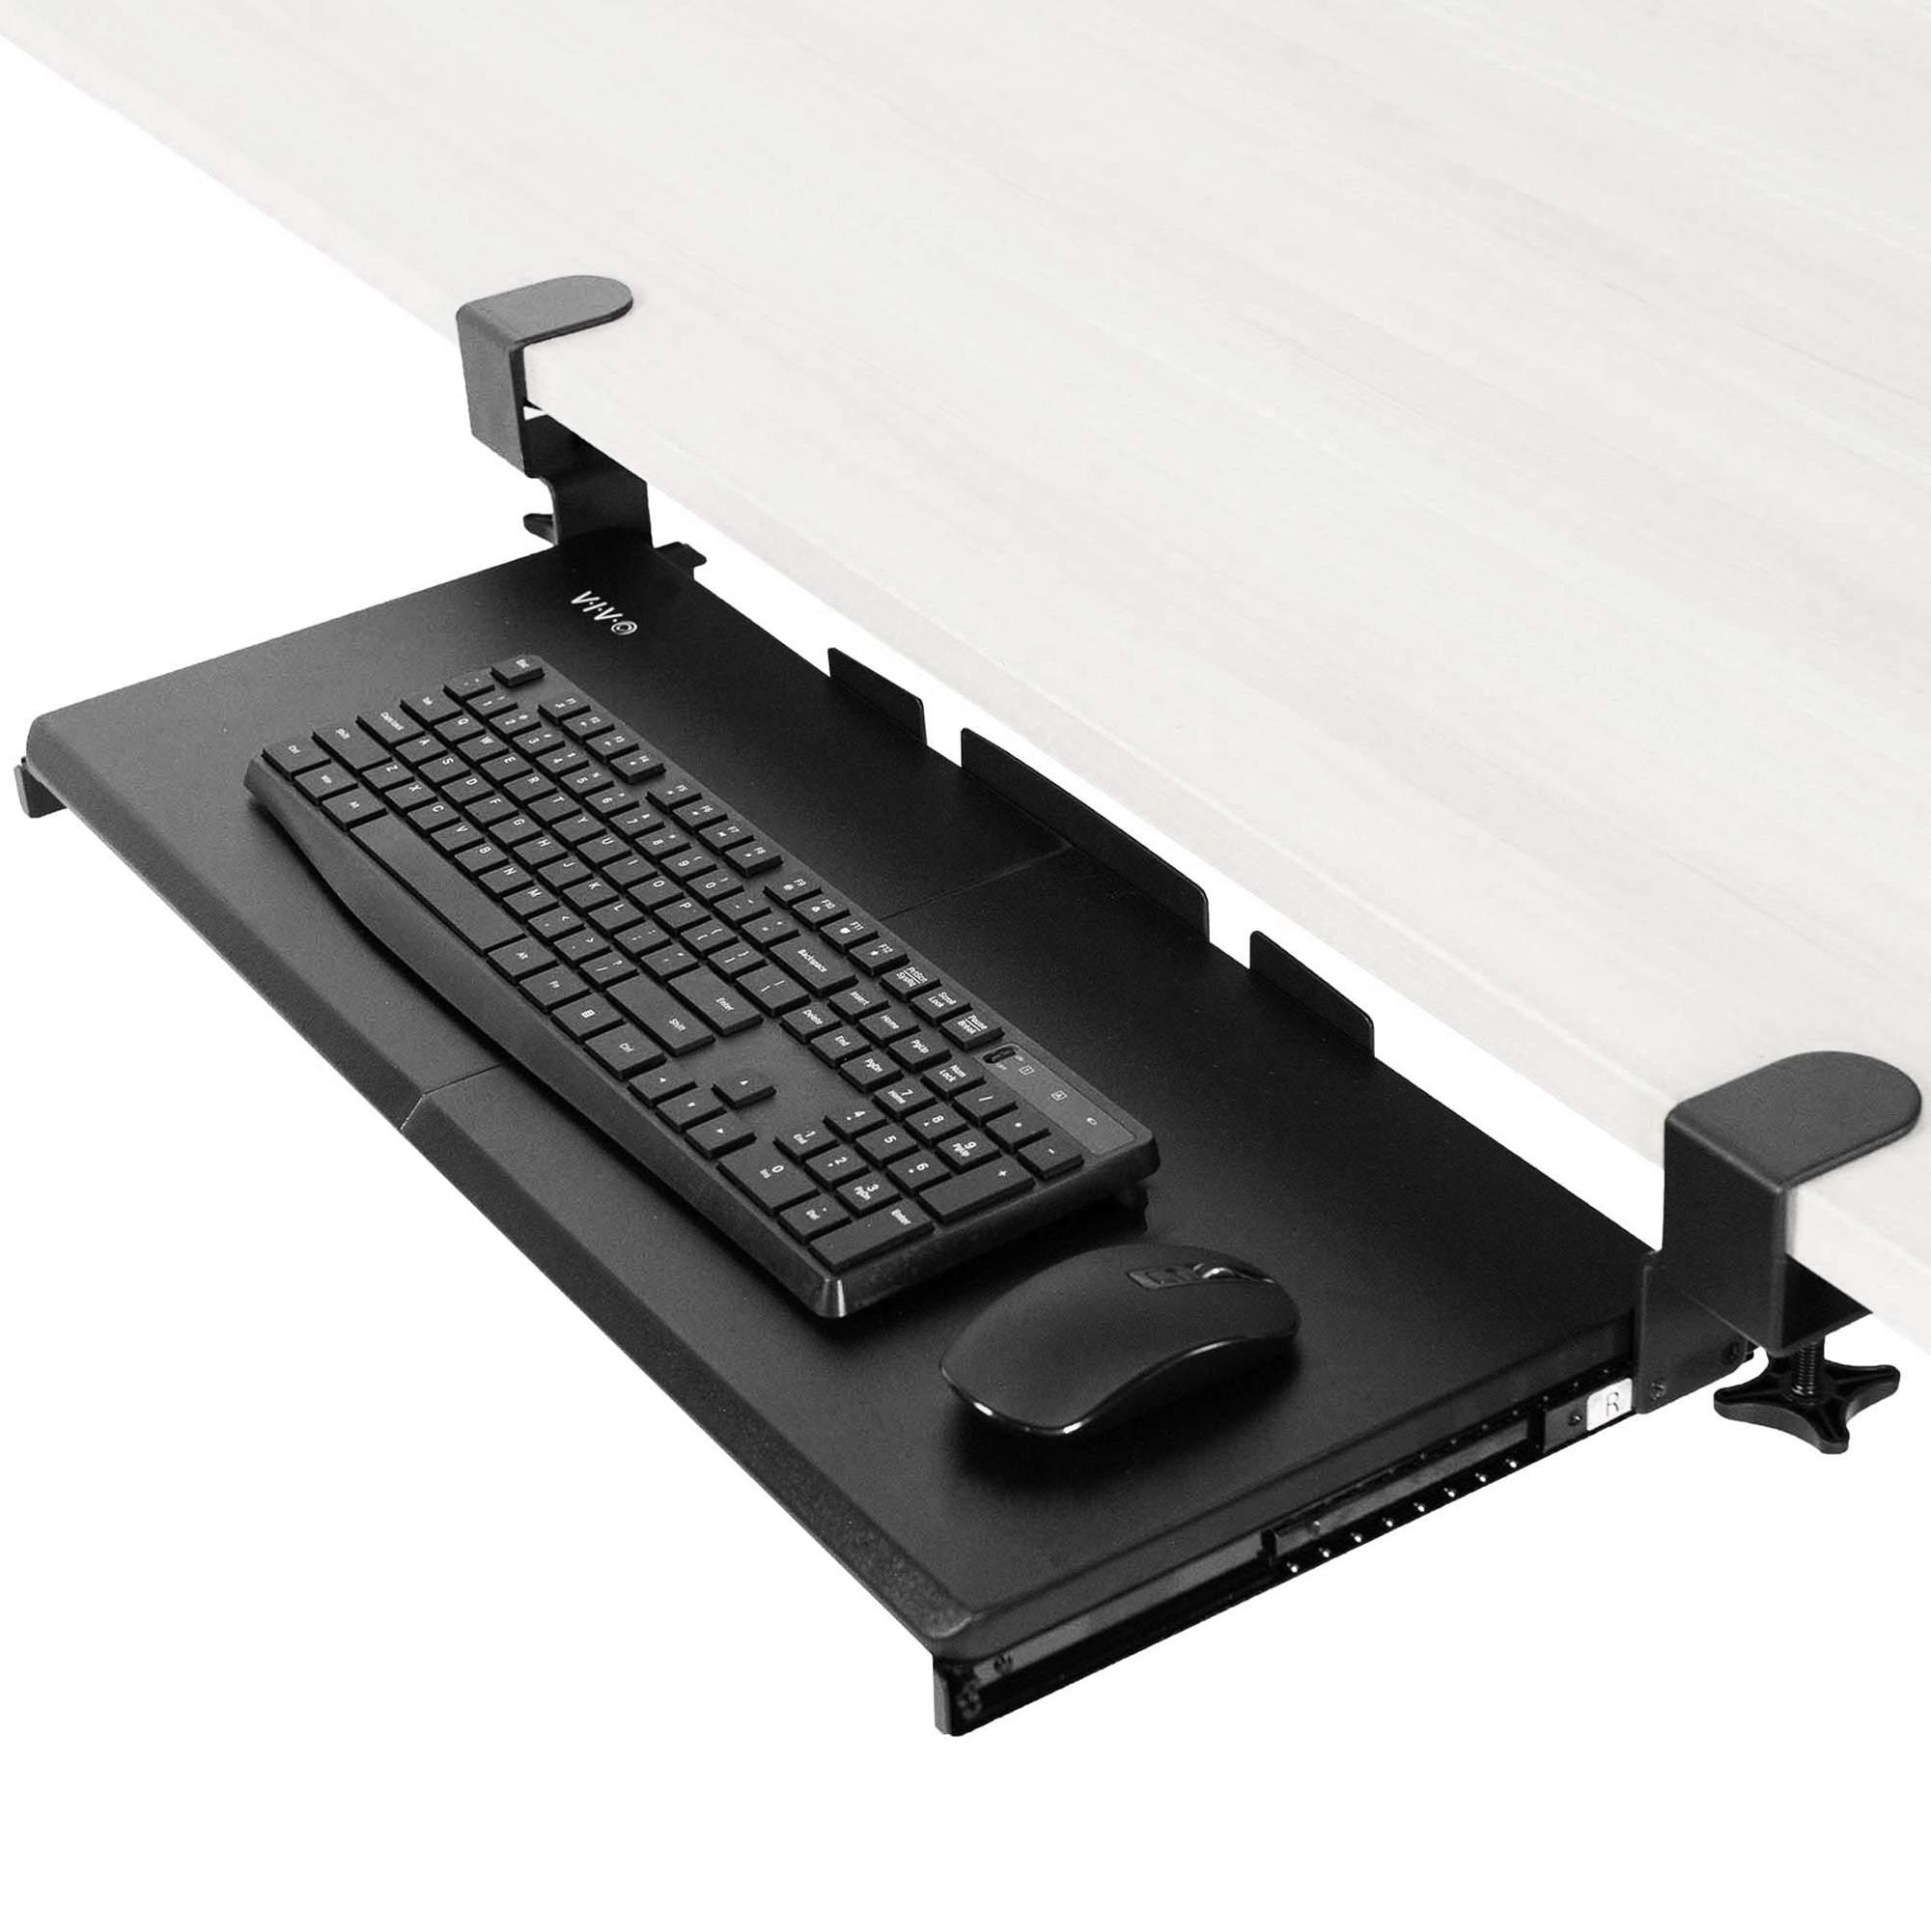 Laptop Mount Chair Keyboard Tray Adjustable Keyboard Mount for Chair  Durable Laptop Mount Chair Keyboard Tray Adjustable Keyboard Mount for Chair  Durable Chair Arm Clamping Support Laptop Holder 